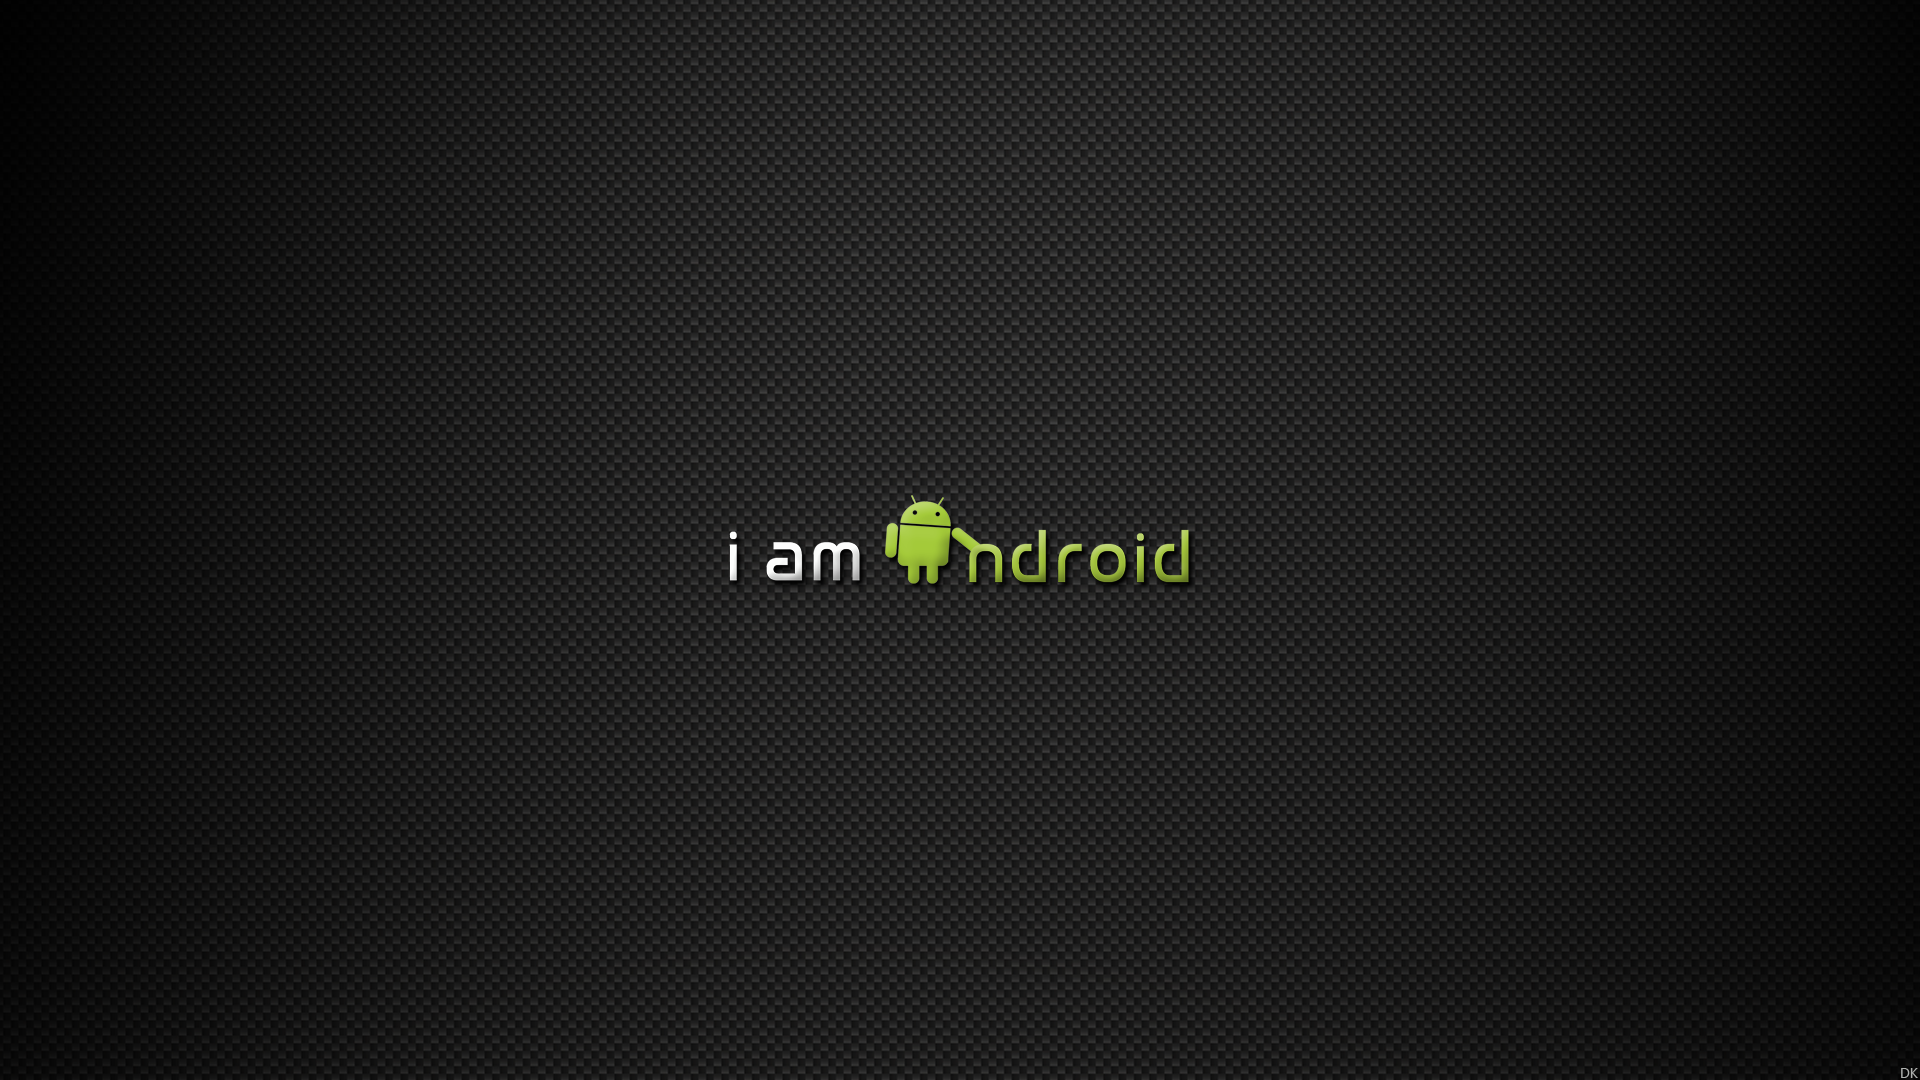 Android wallpaper dimensions